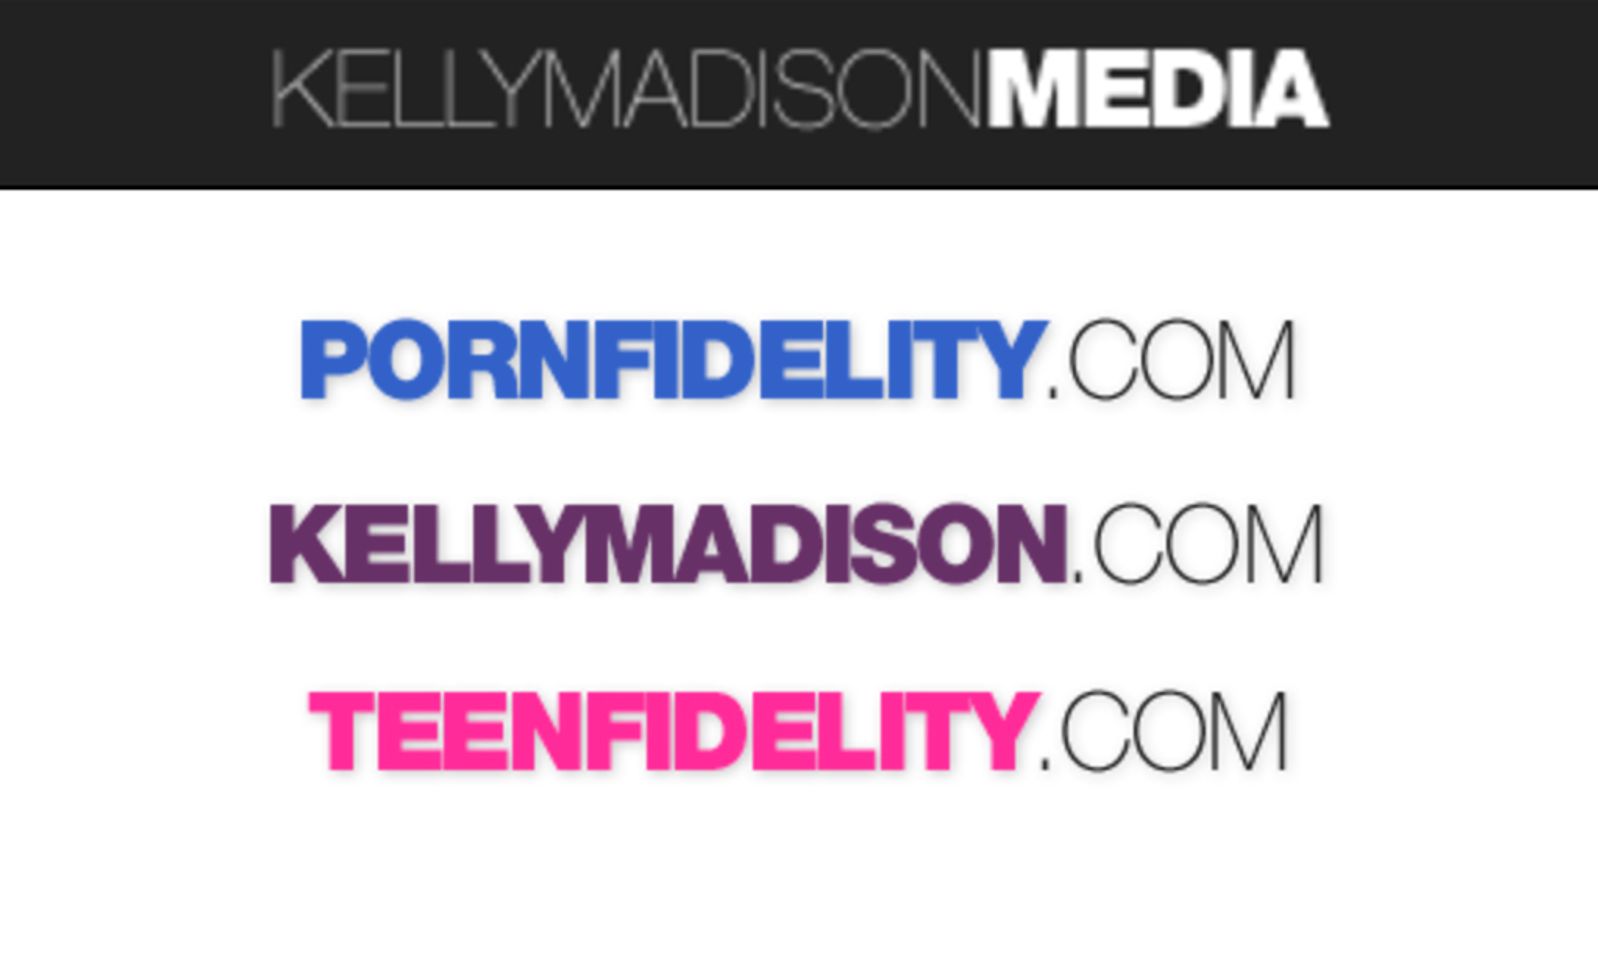 Kelly Madison Media's Teens Get ‘Perky’ for the Fourth Time